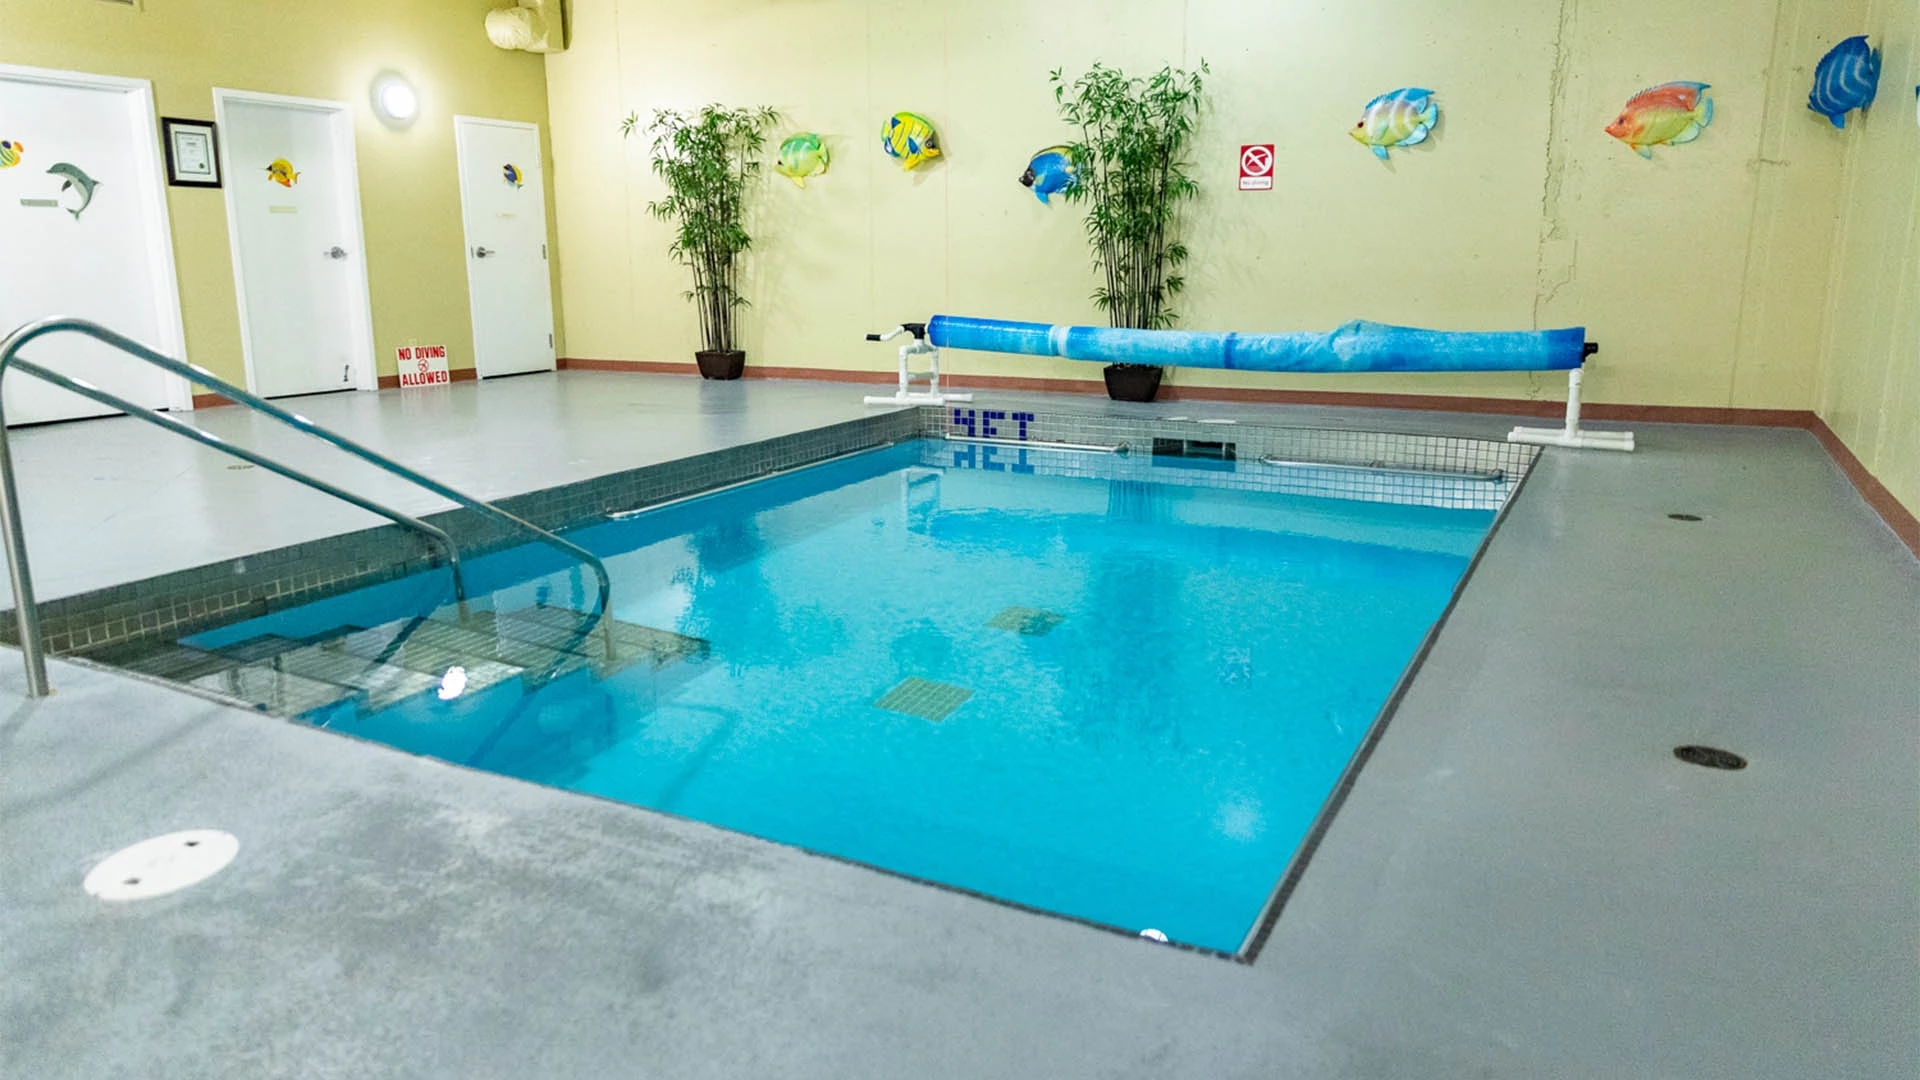 A swimming pool on site